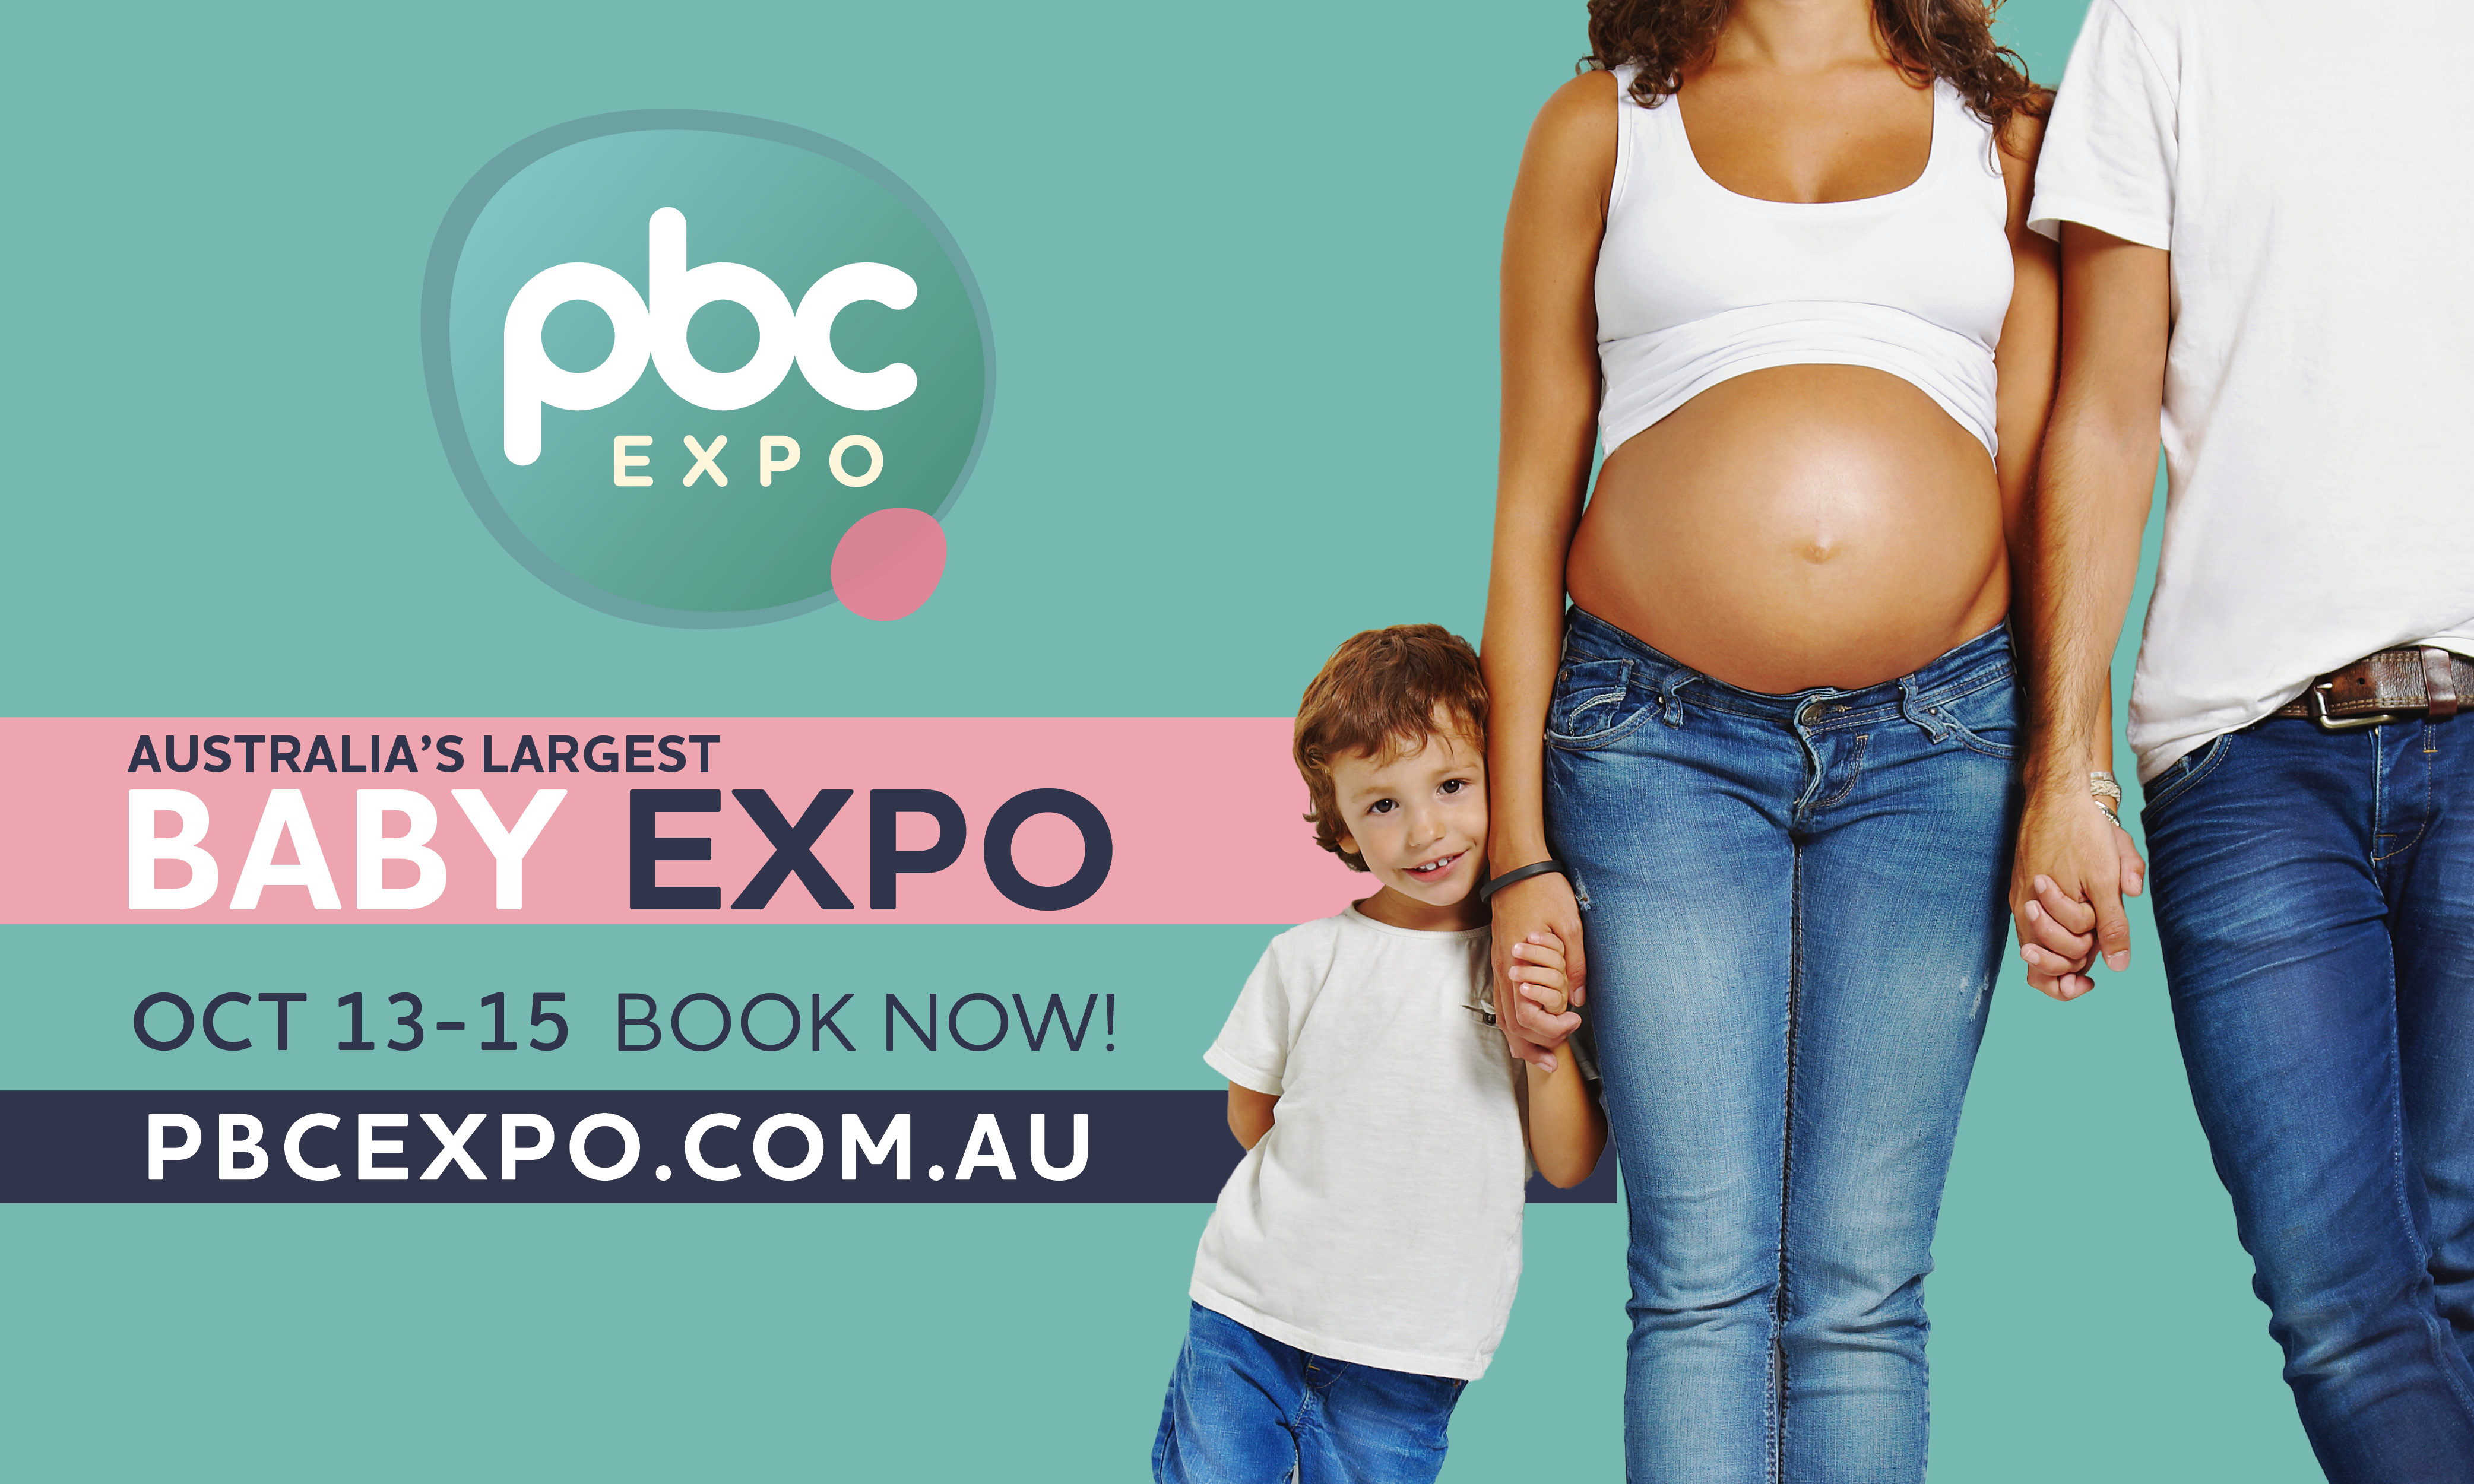 BABY EXPO 13 -15 October $5 Ticket (Was $10), $0 for Under 18 @ MCEC